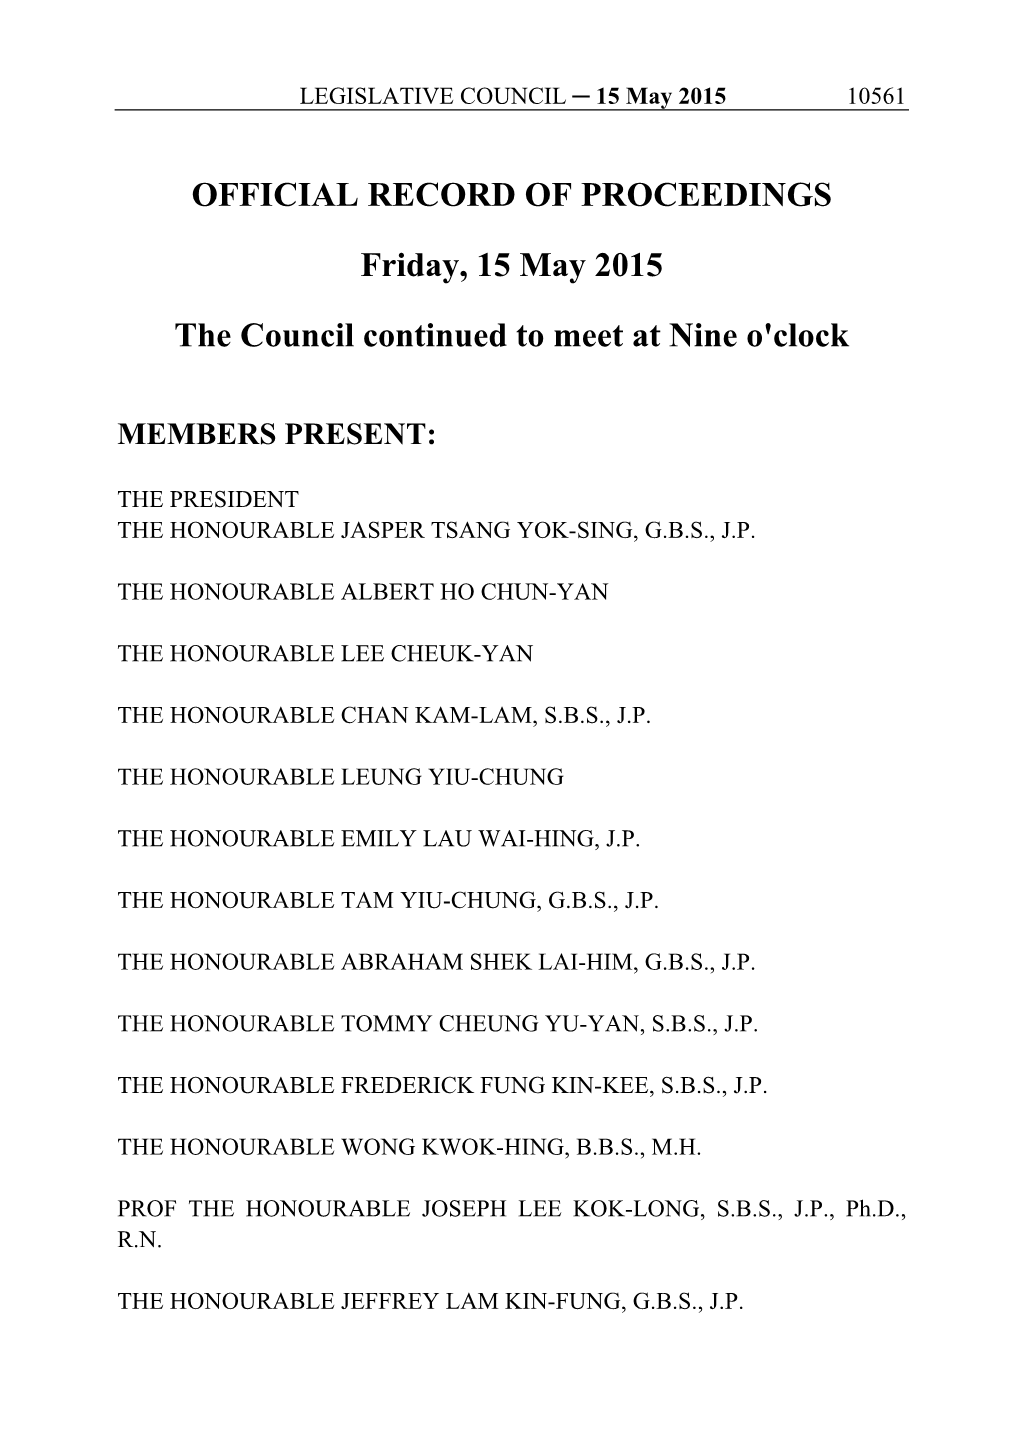 OFFICIAL RECORD of PROCEEDINGS Friday, 15 May 2015 the Council Continued to Meet at Nine O'clock